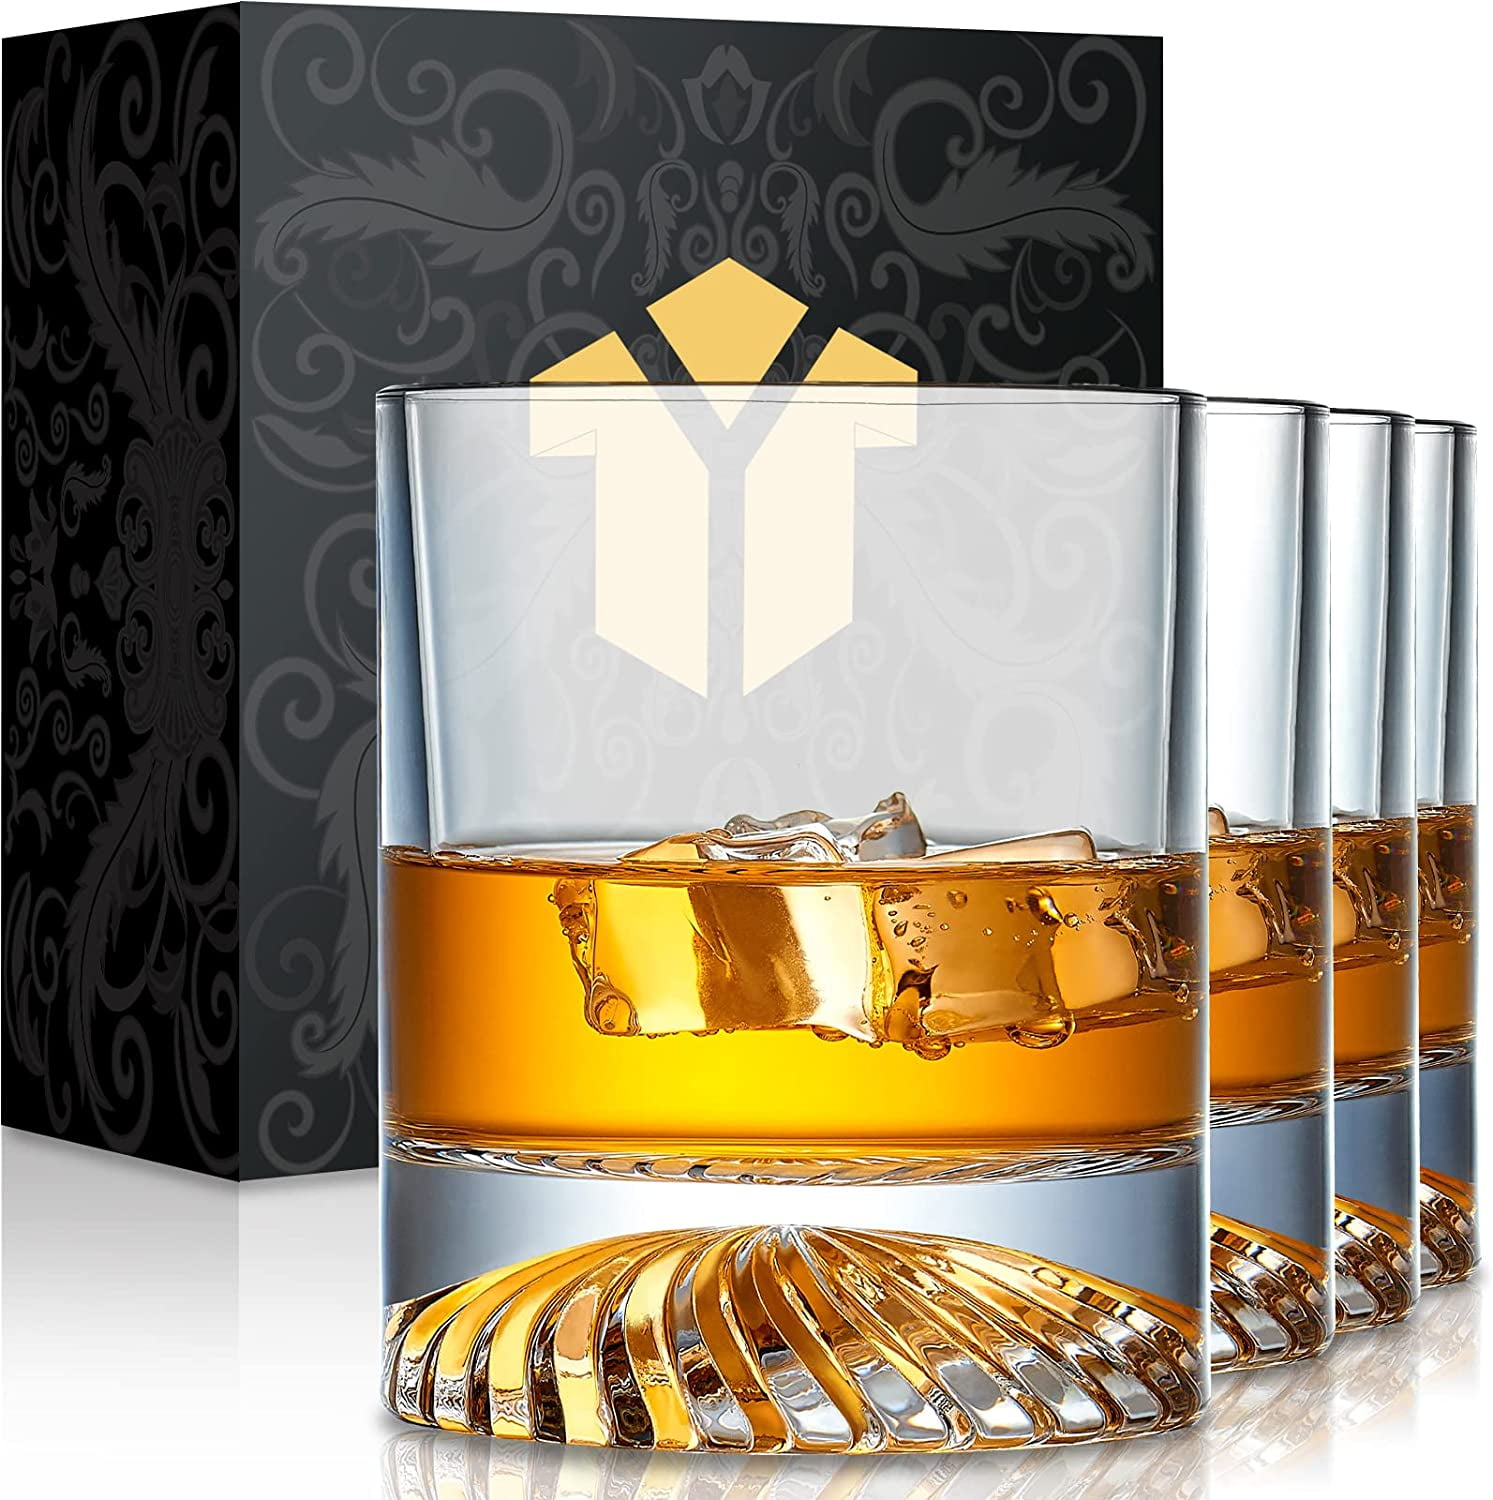 Royalty Art Whiskey Glasses - Set of 4 Premium Crystal Tumblers with The  Distinctive Kinsley Design …See more Royalty Art Whiskey Glasses - Set of 4